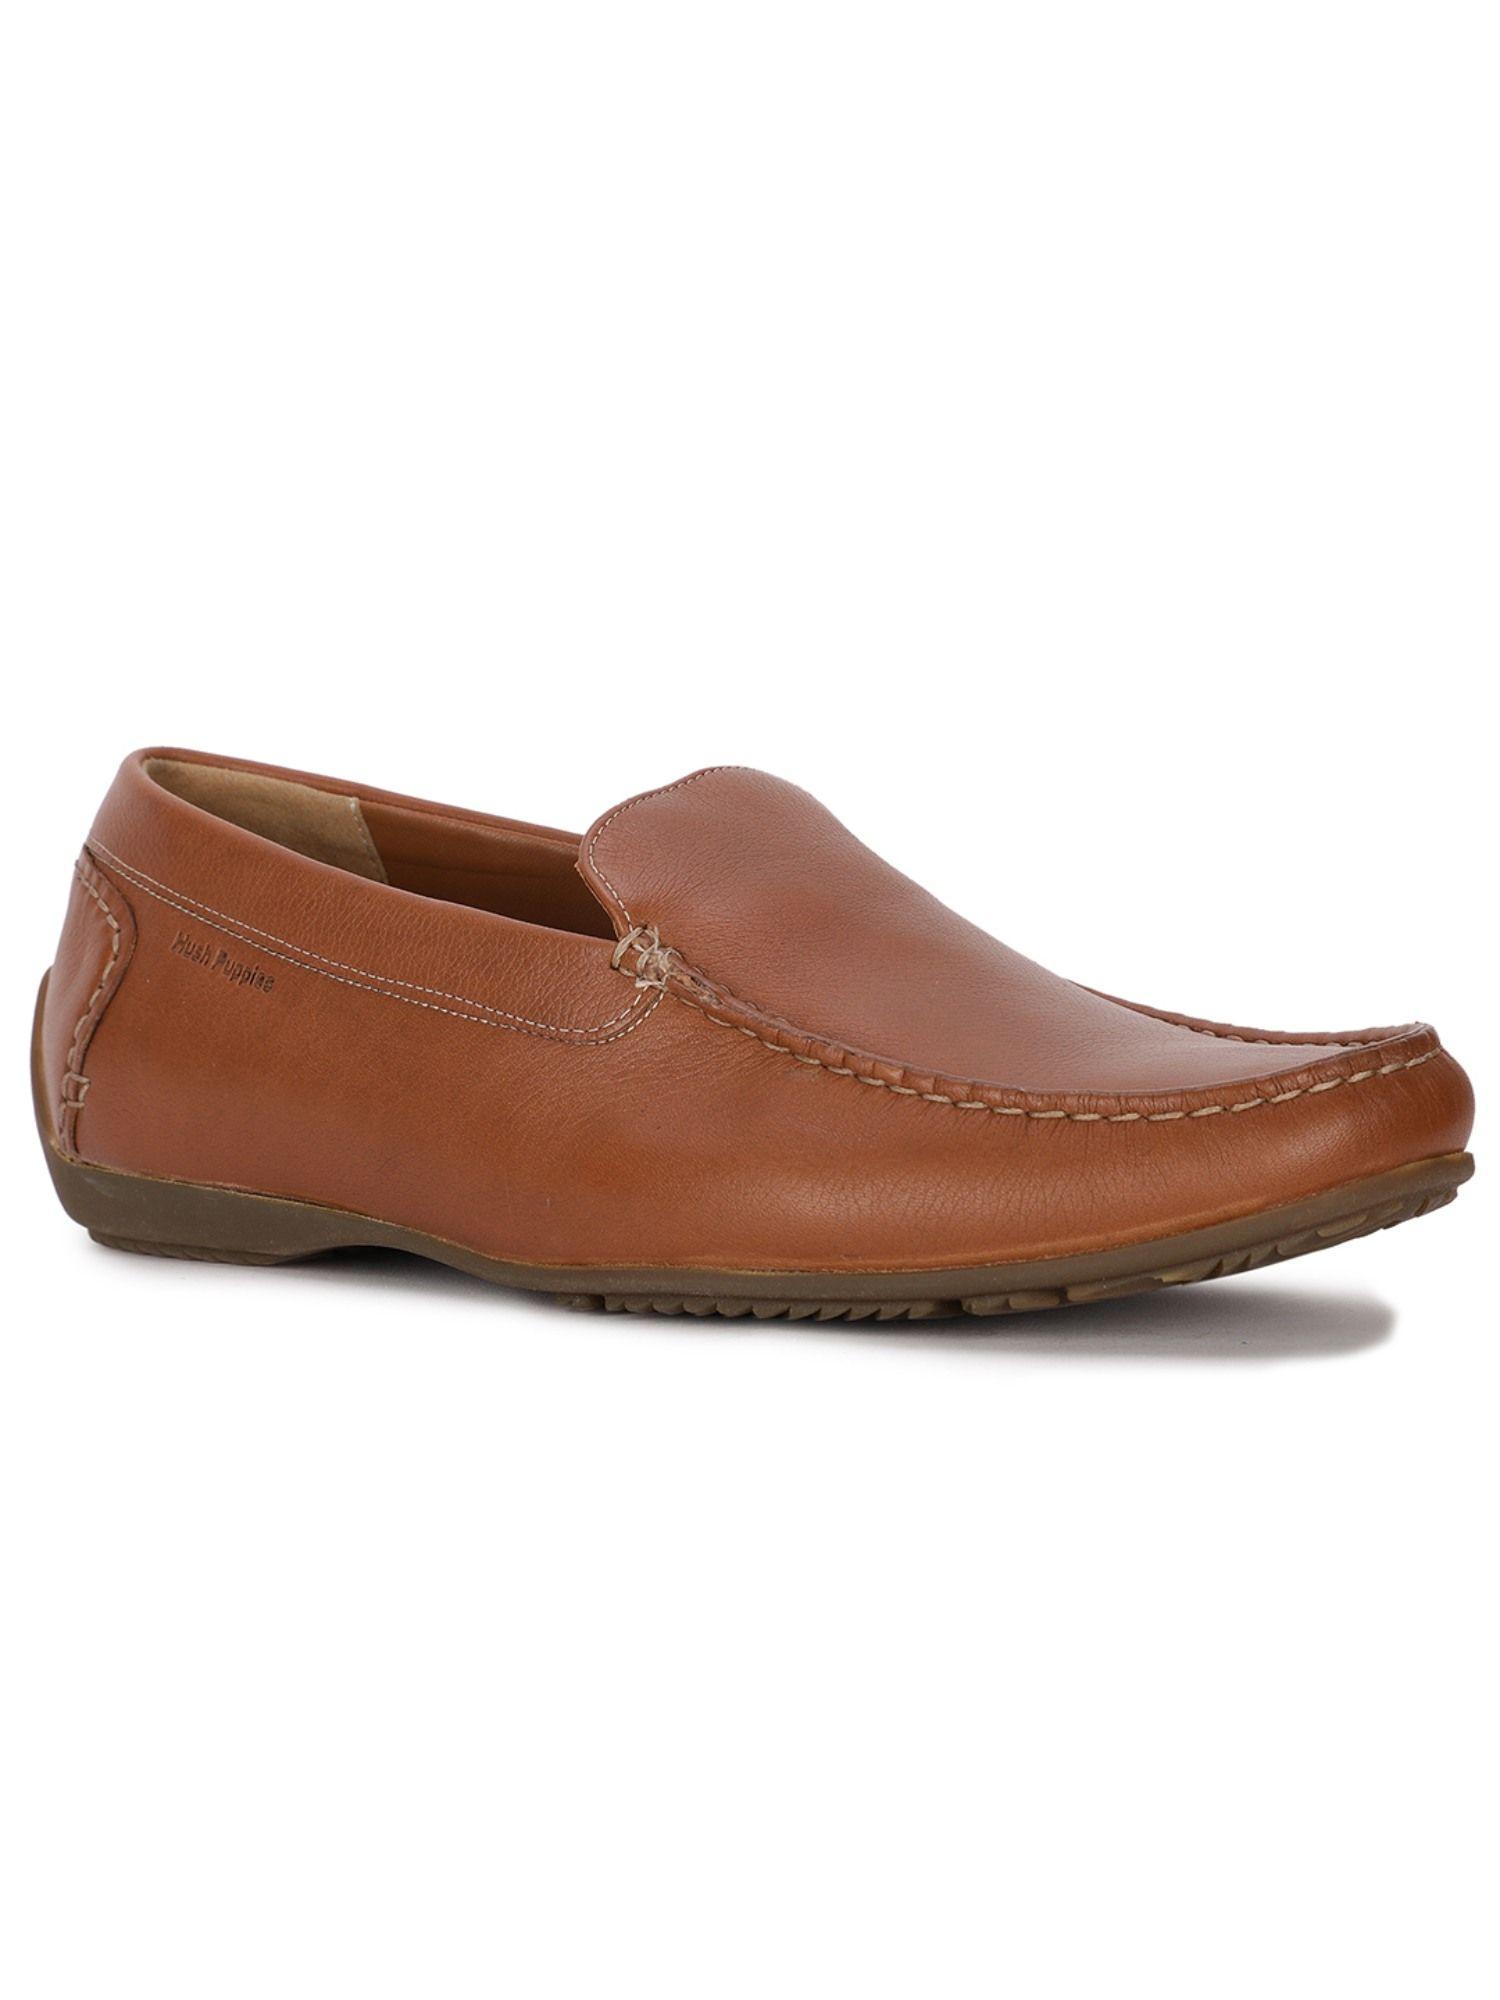 tan-casual-shoes-for-men